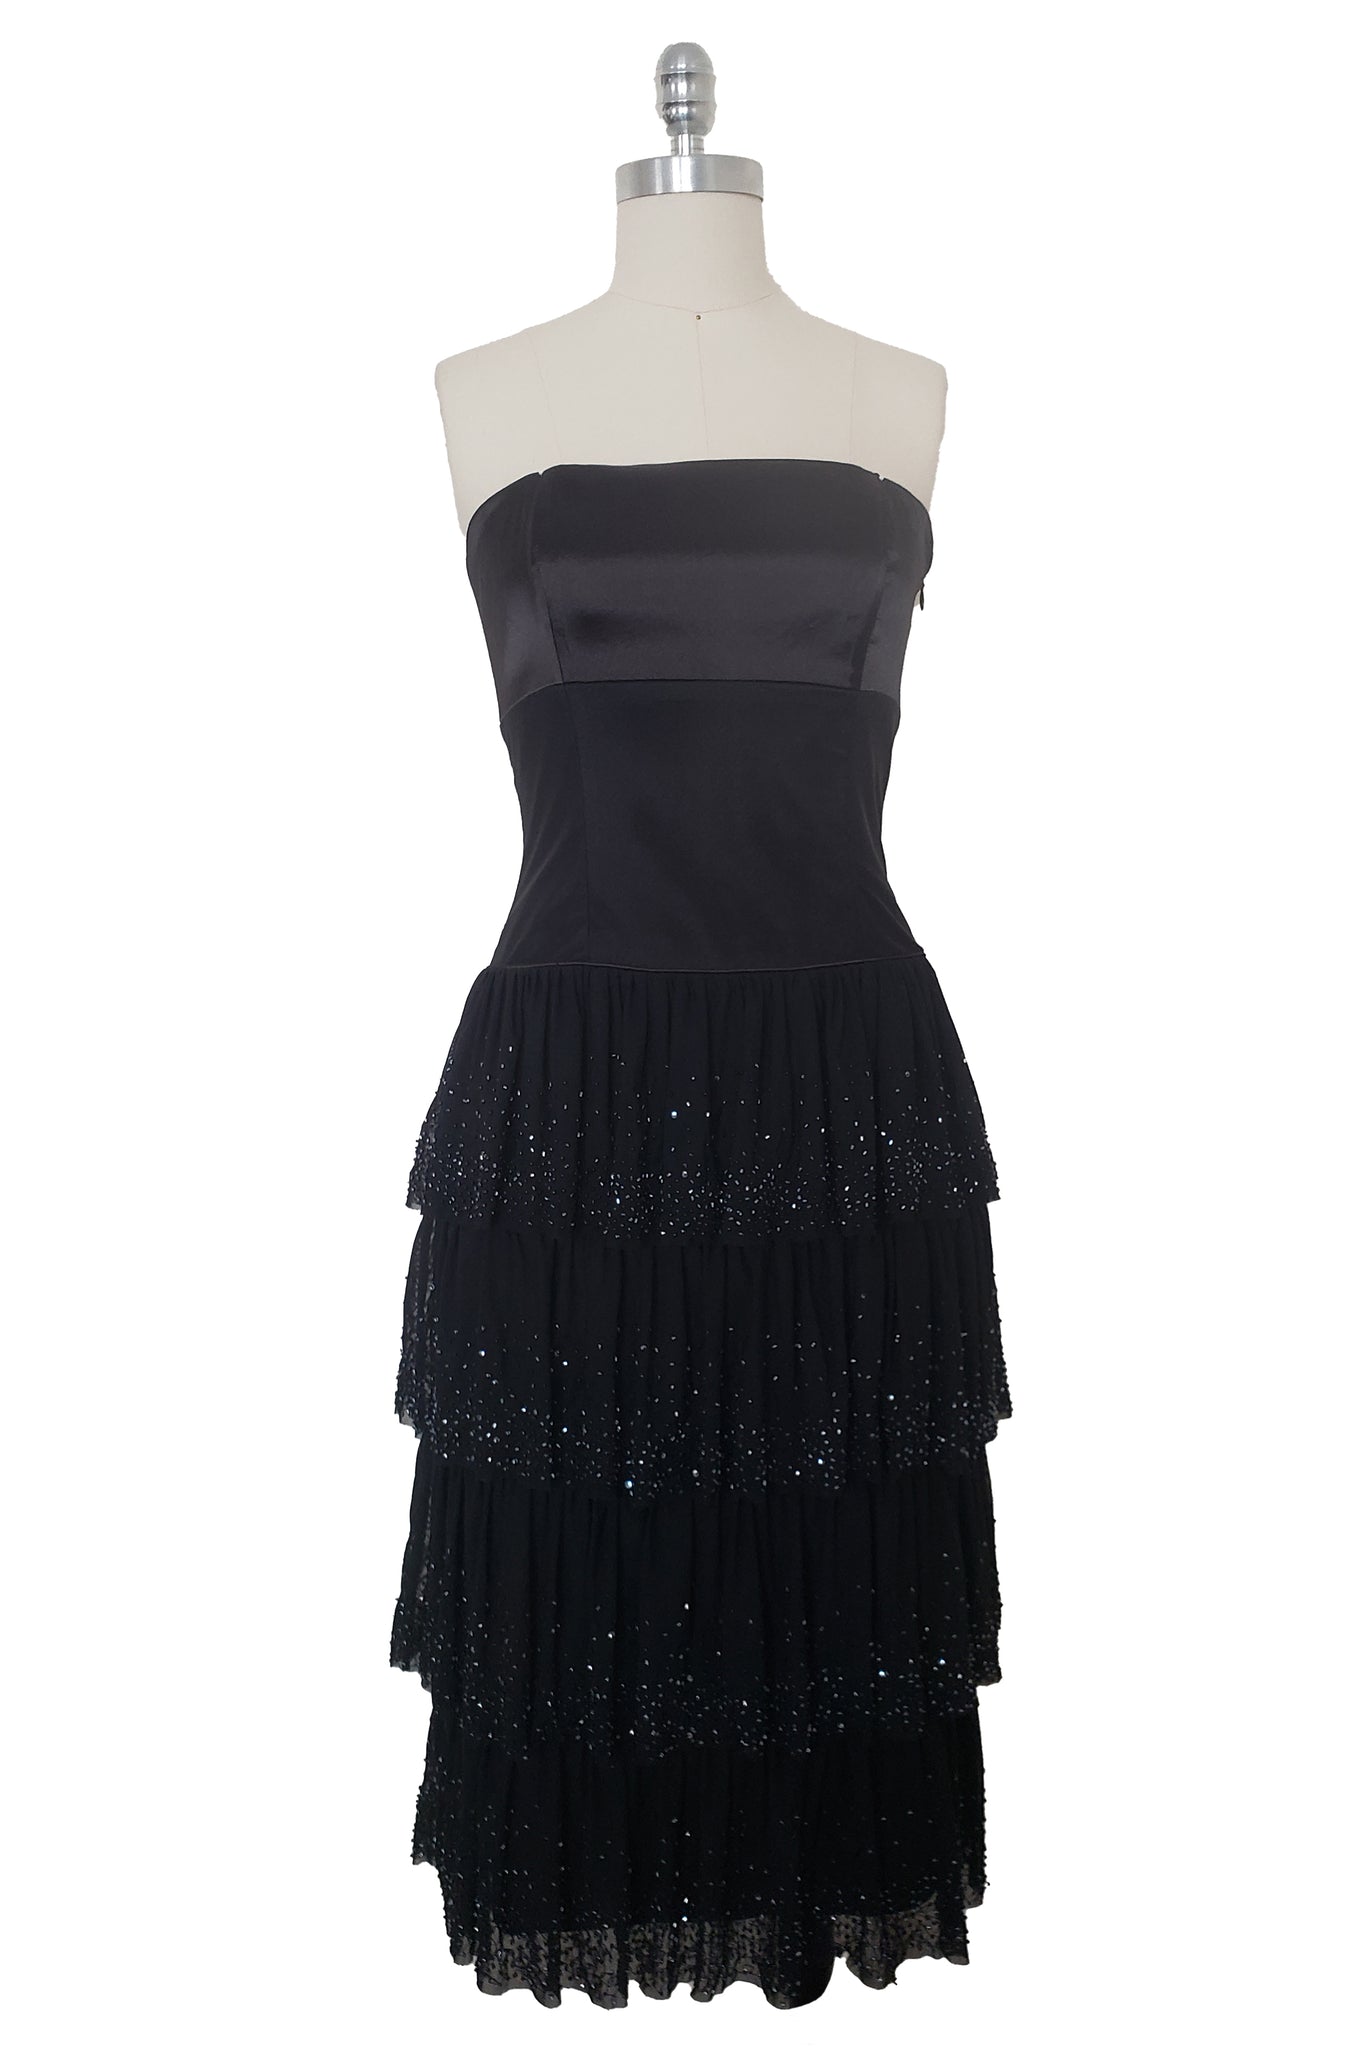 NWT 2000s Vintage Strapless Black Satin and Mesh Cocktail Dress by Laundry, Extra Small to Small